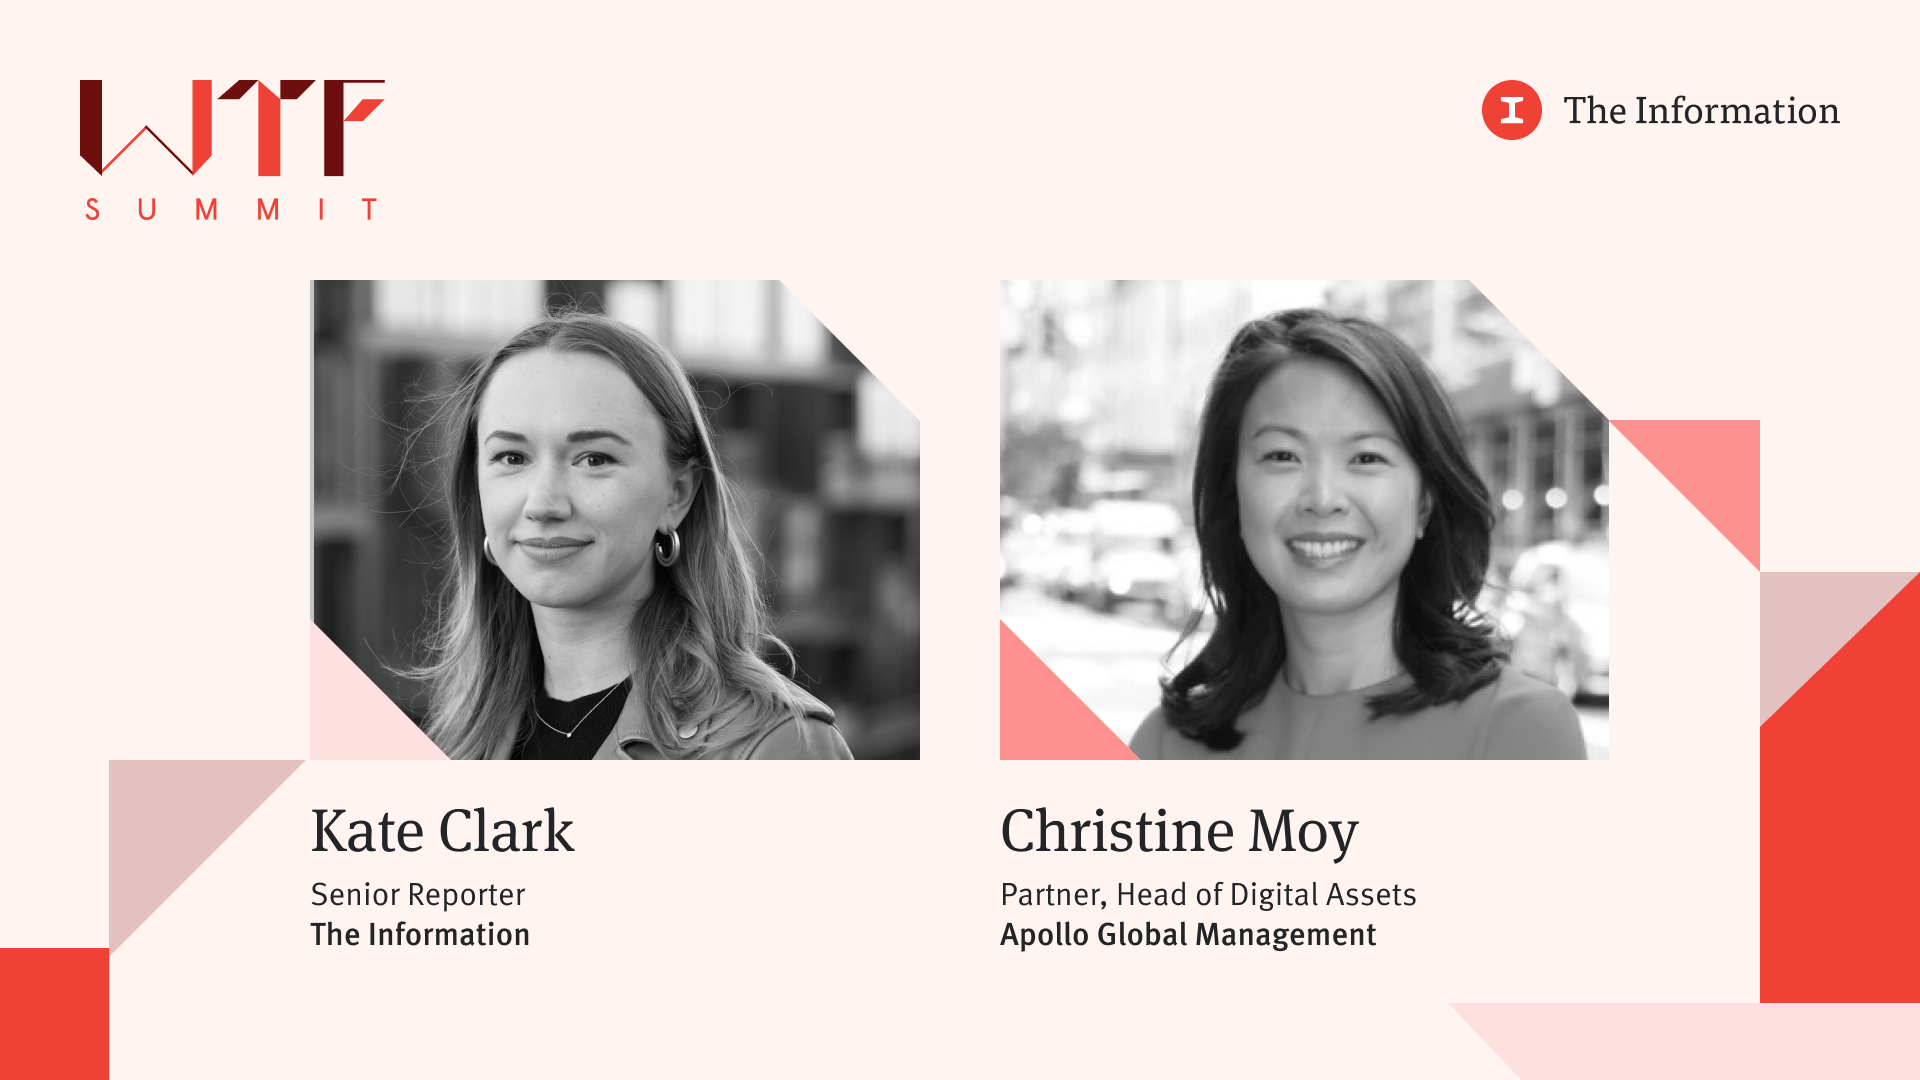 WTF 2022 - Christine Moy, Partner, Head of Digital Assets, Apollo Global Management in conversation with Kate Clark, Senior Reporter, The Information